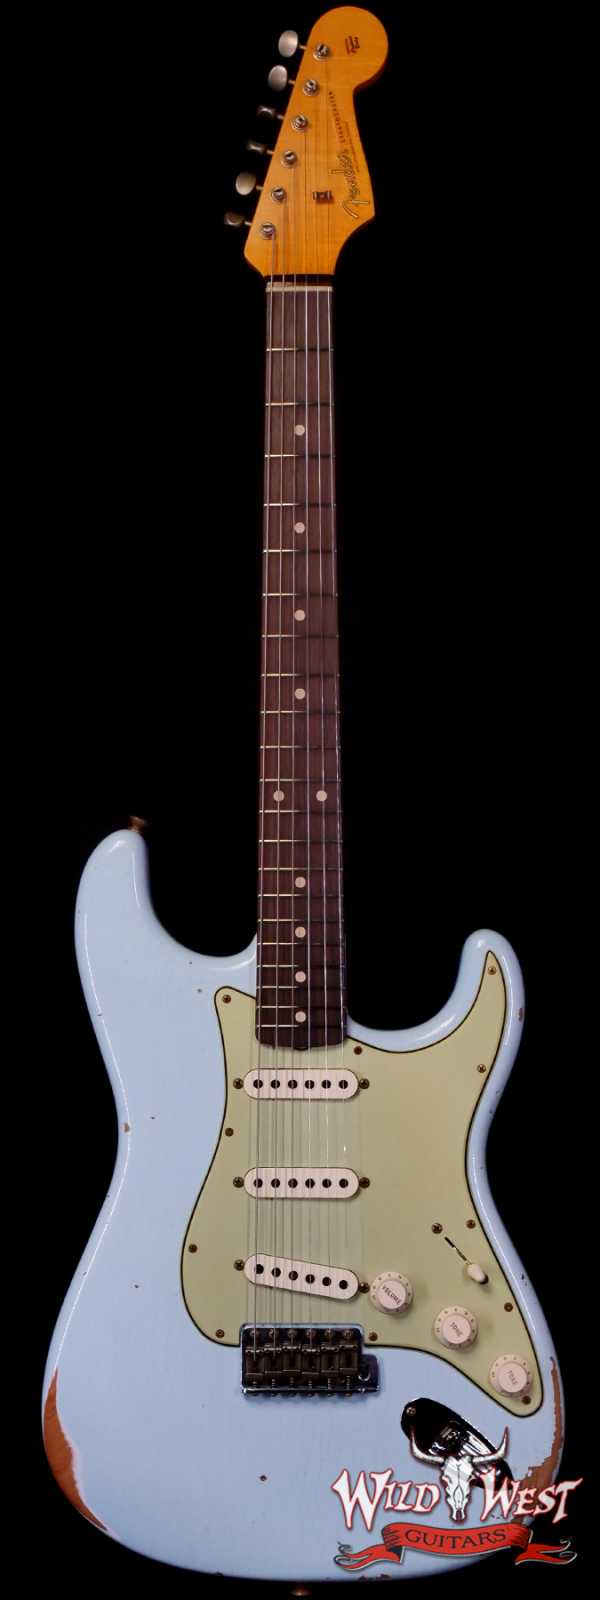 Fender Custom Shop 1962 Stratocaster Hand-Wound Pickups AAA Dark Rosewood Slab Board Relic Sonic Blue 7.65 LBS